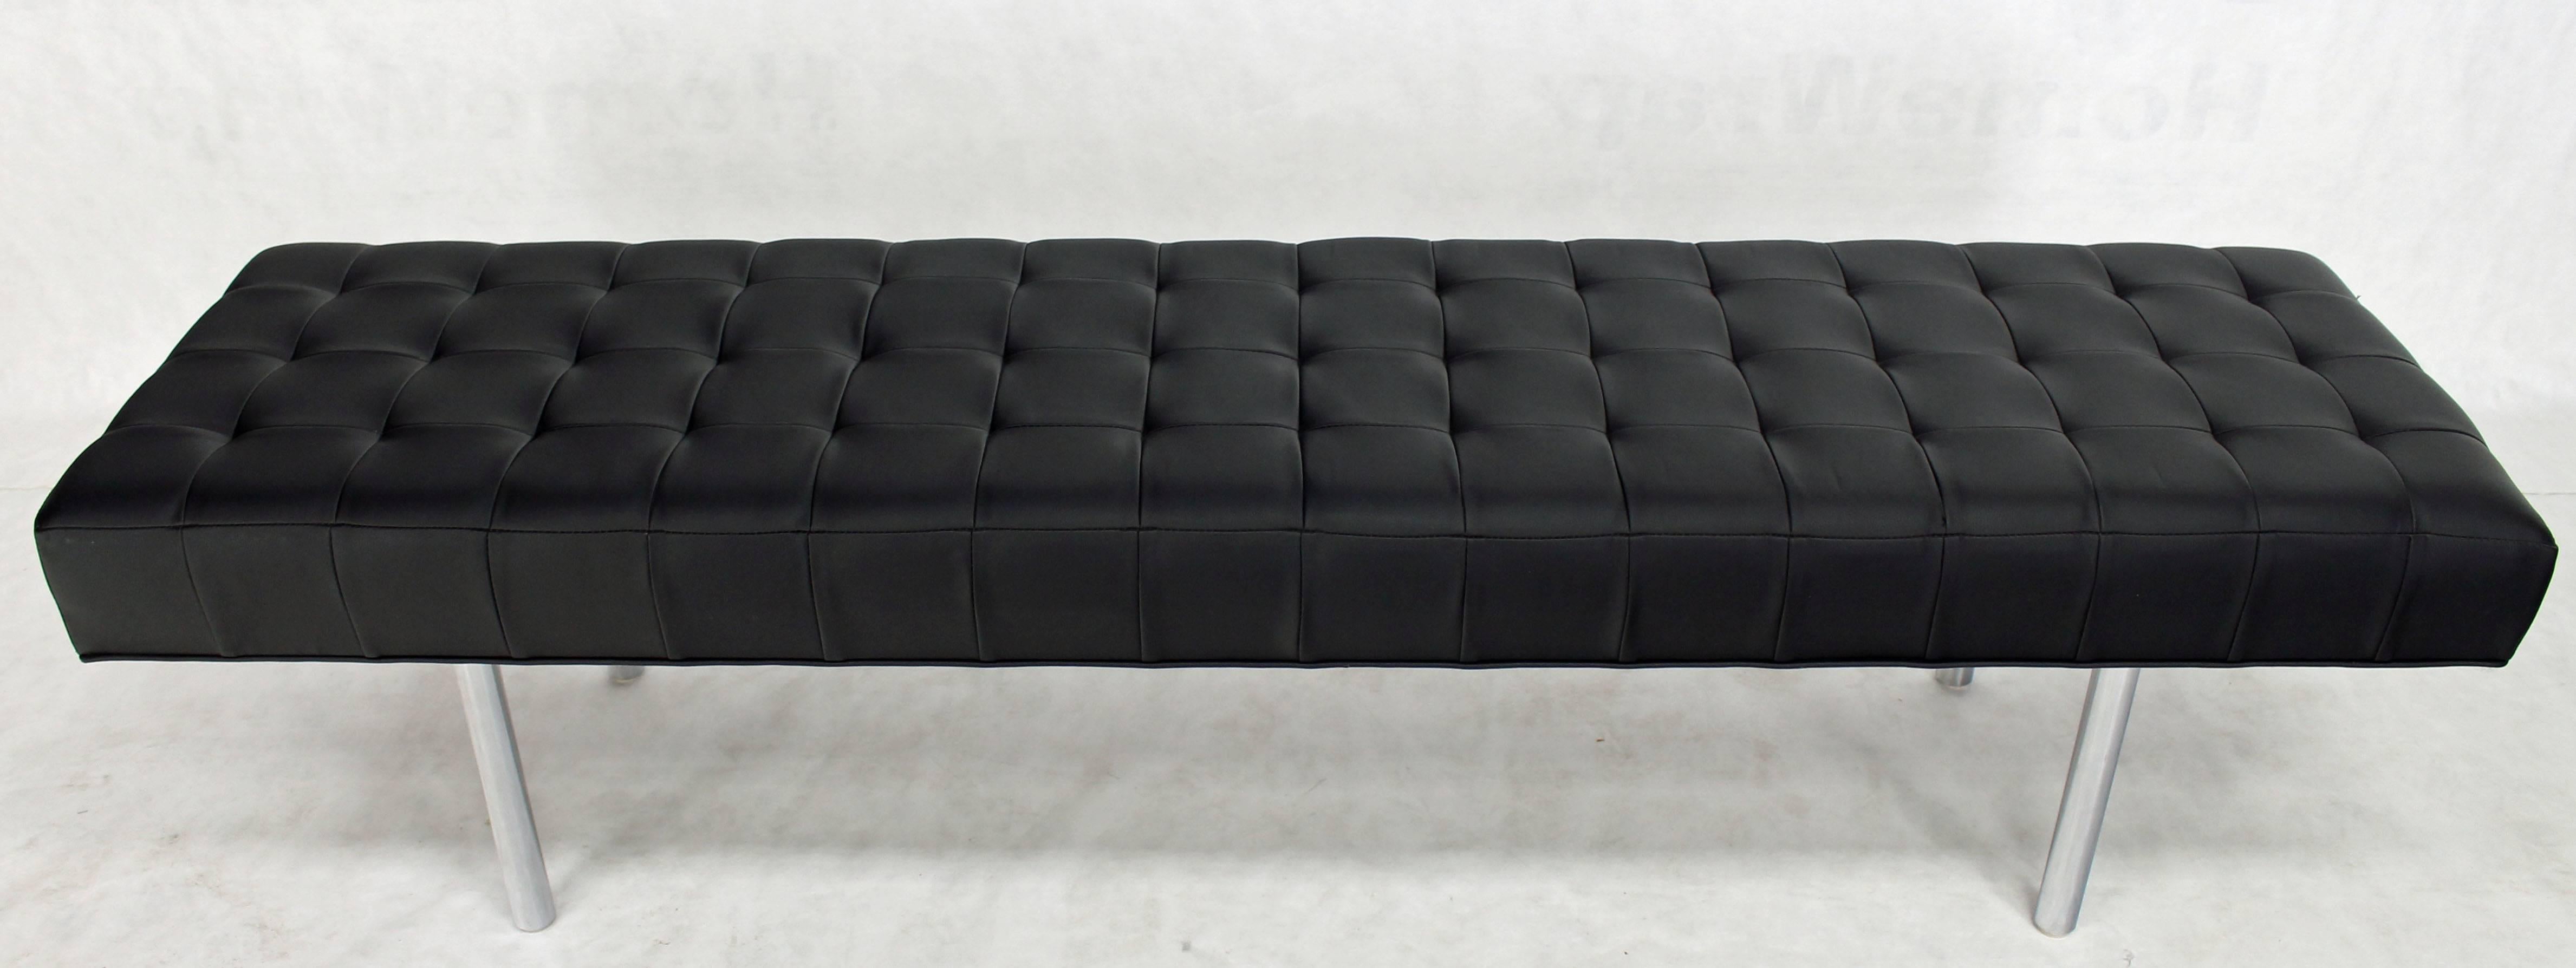 Mid-Century Modern long black tufted upholstery bench, or almost narrow daybed.